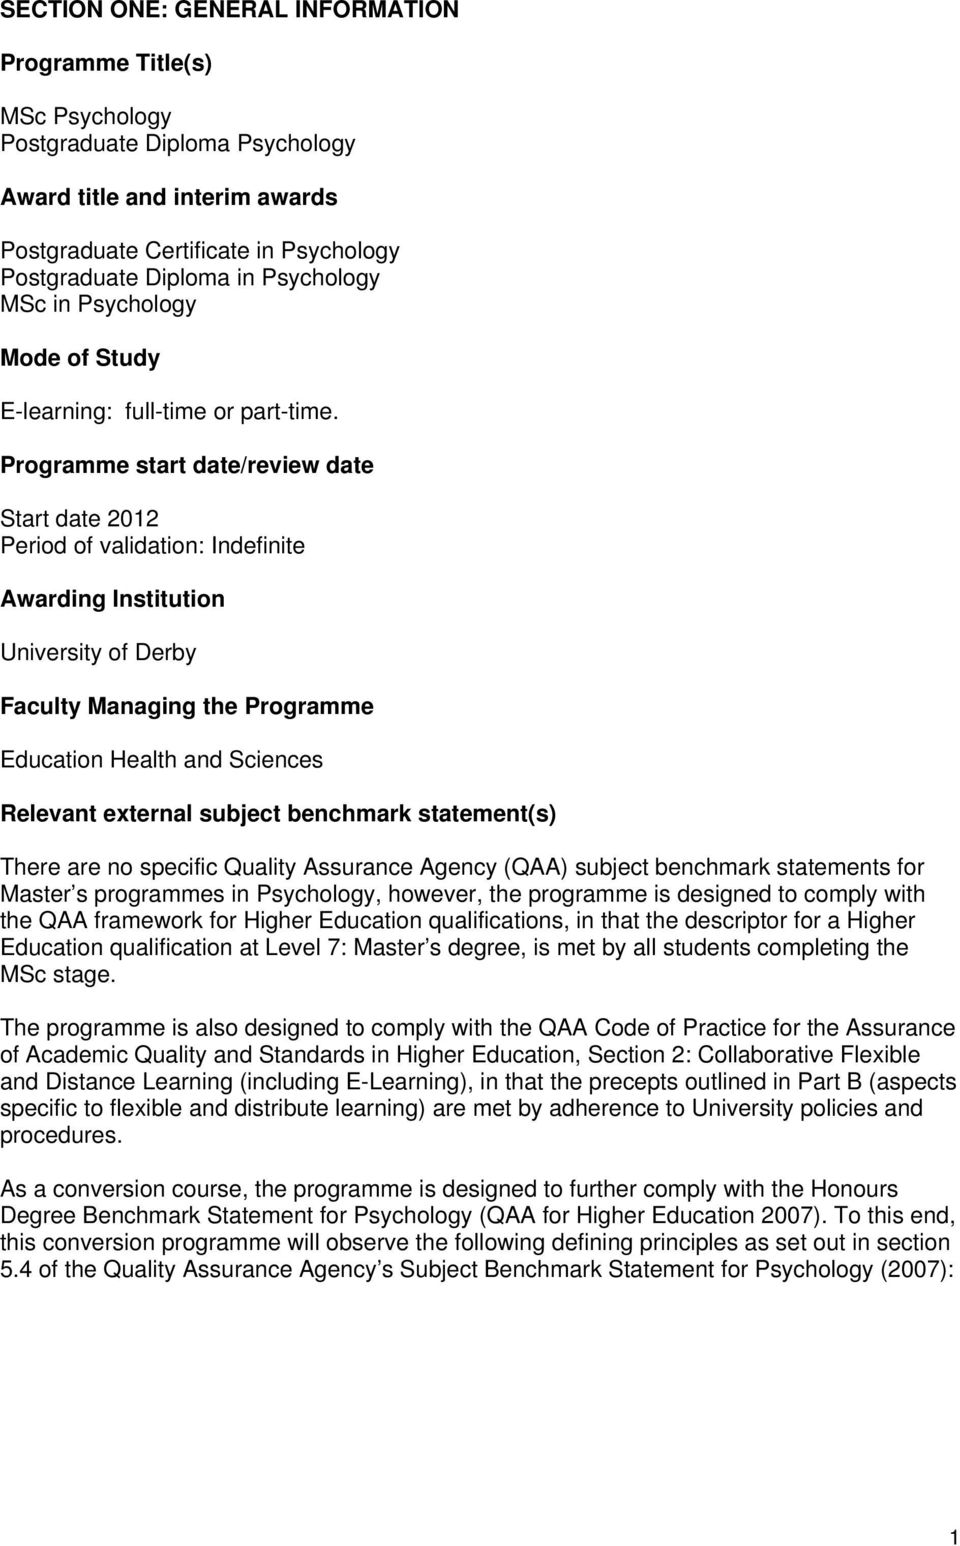 Programme start date/review date Start date 2012 Period of validation: Indefinite Awarding Institution University of Derby Faculty Managing the Programme Education Health and Sciences Relevant